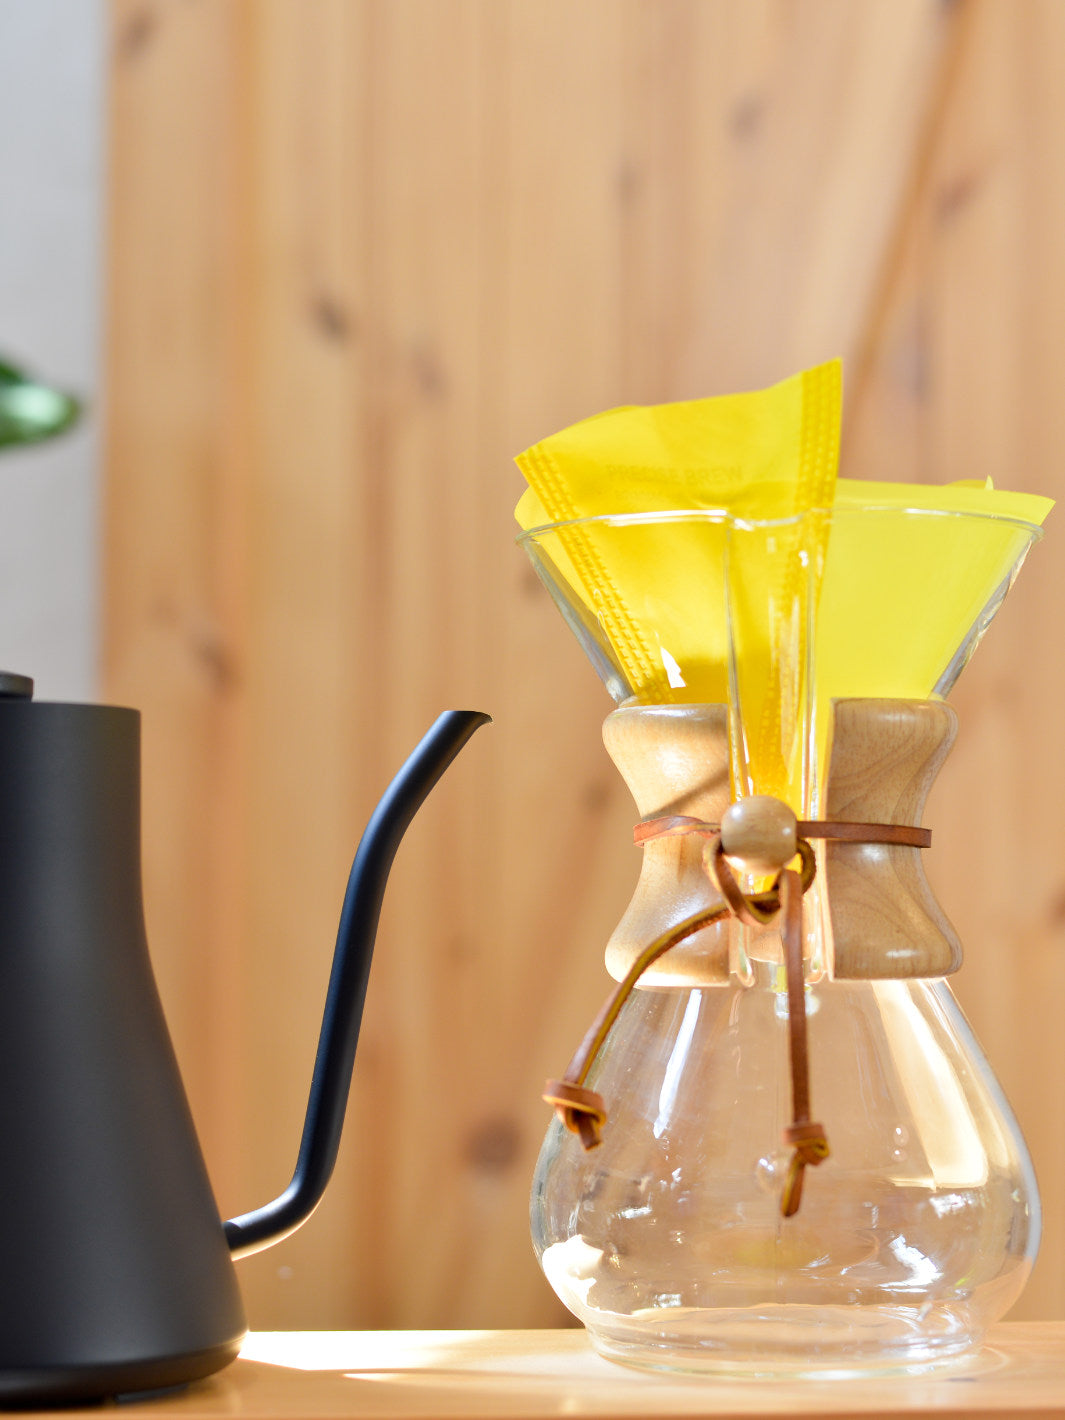 PRECISE BREW CHEMEX® 6-Cup Filters